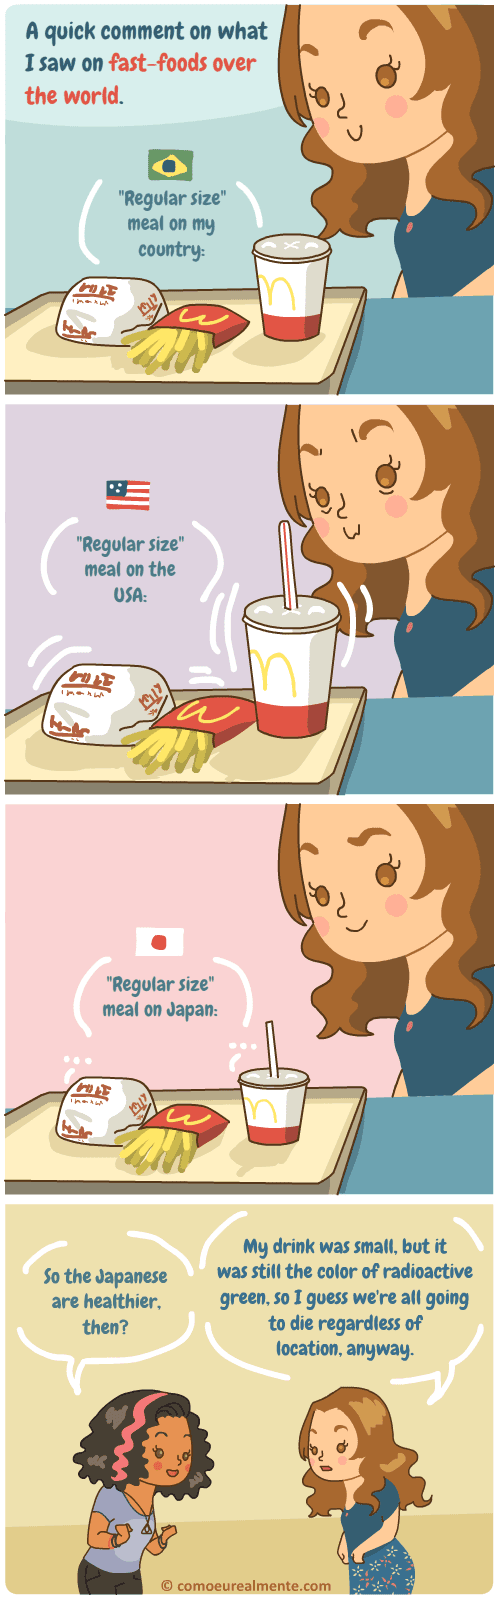 A comic about the size difference of what is considered a regular size McDonalds meal on different countries